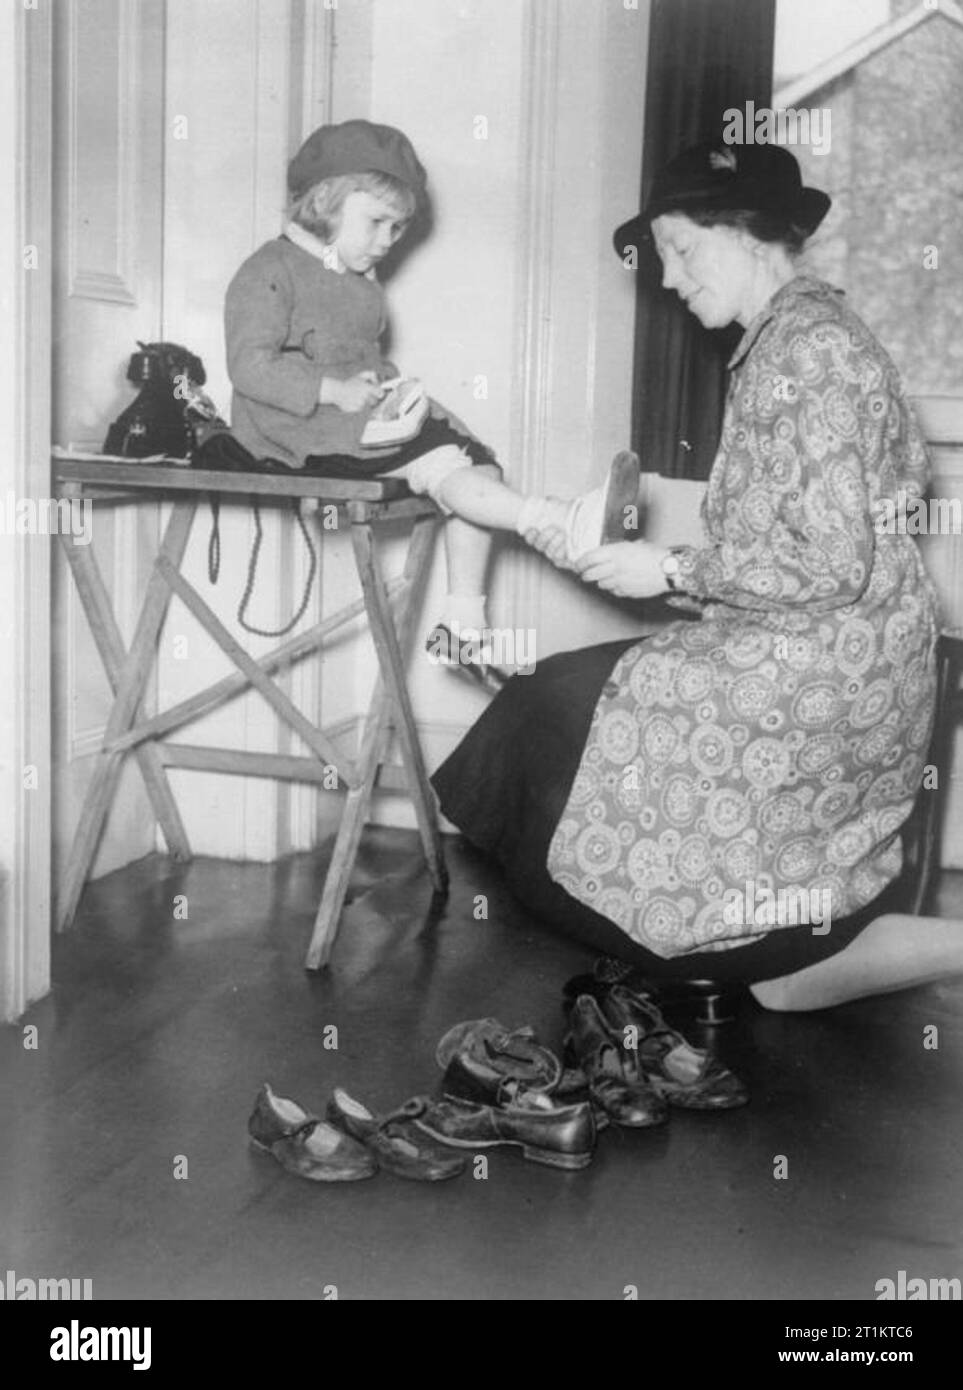 The work of the Citizens' Advice Bureau, Eldon House, Croydon, England, 1940 A young girl is fitted for new shoes by a female volunteer at the Citizens' Advice Bureau in Croydon. Stock Photo